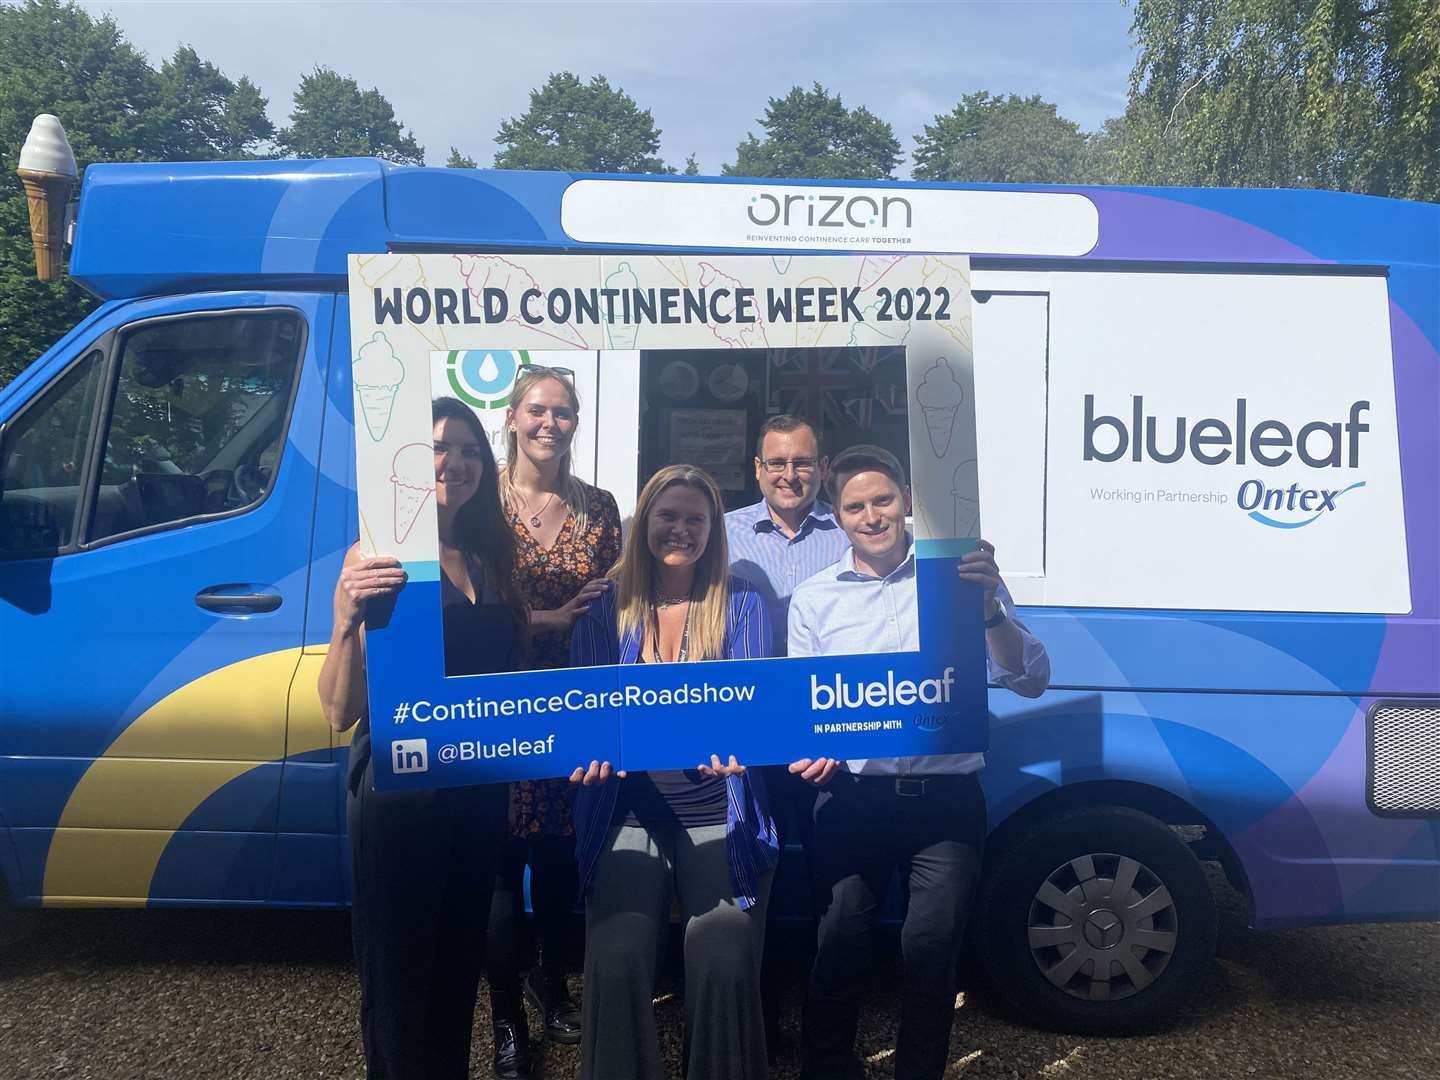 The team at Blueleaf travelled around Kent giving out Ice cream and advice on Continence (57467864)